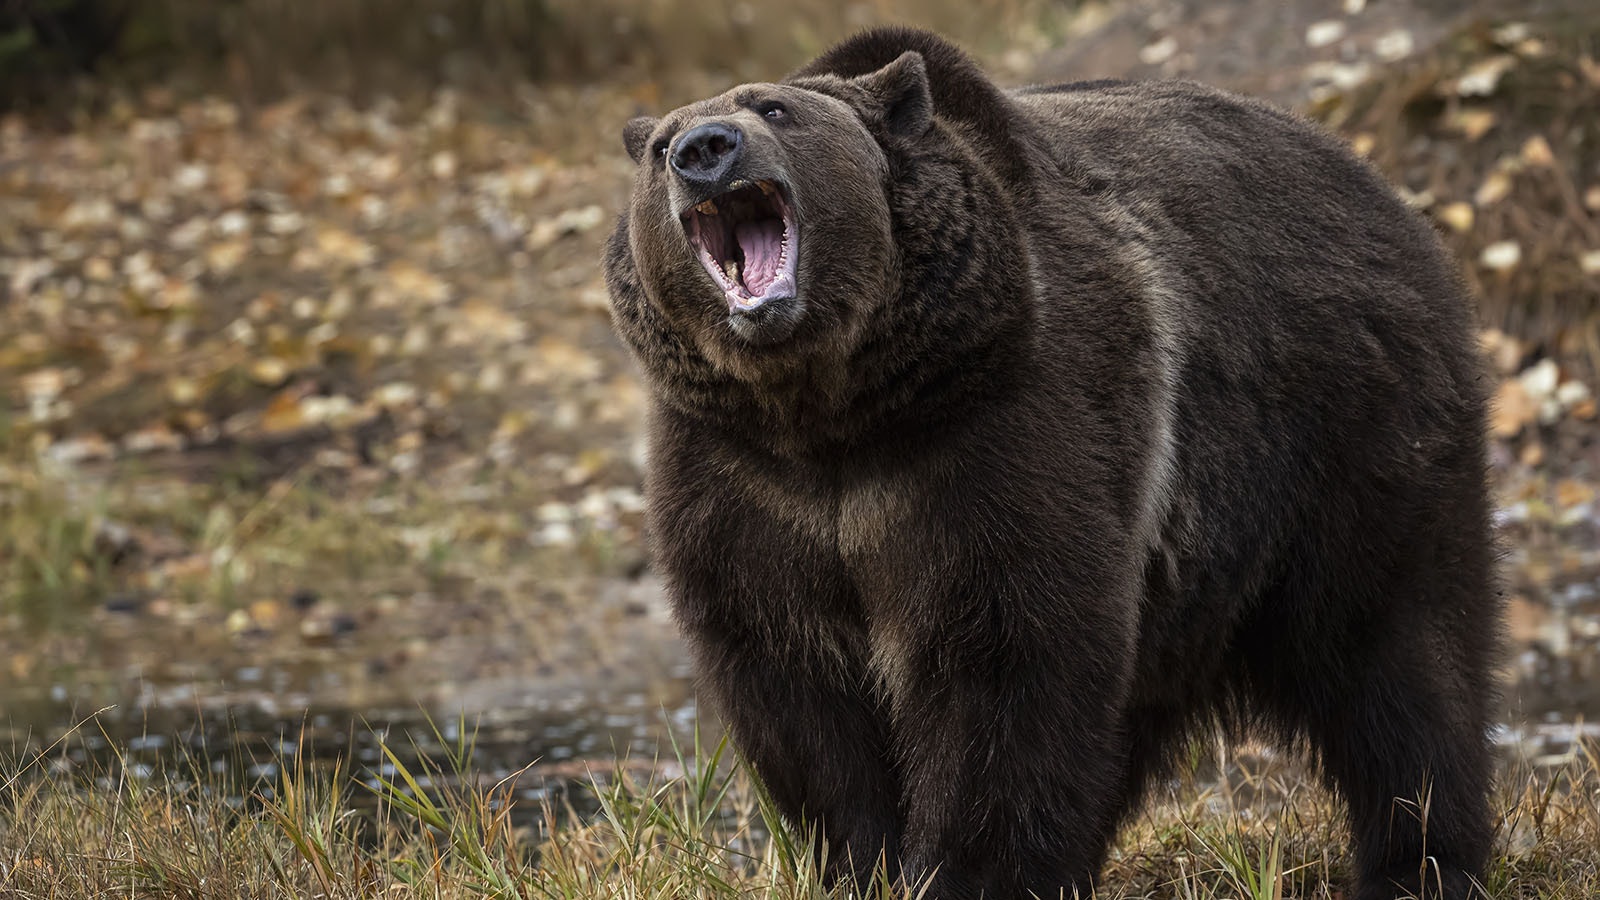 Bruno, one of the Yellowstone Econsystem's famous male grizzly bears, can get cranky if people get too close.